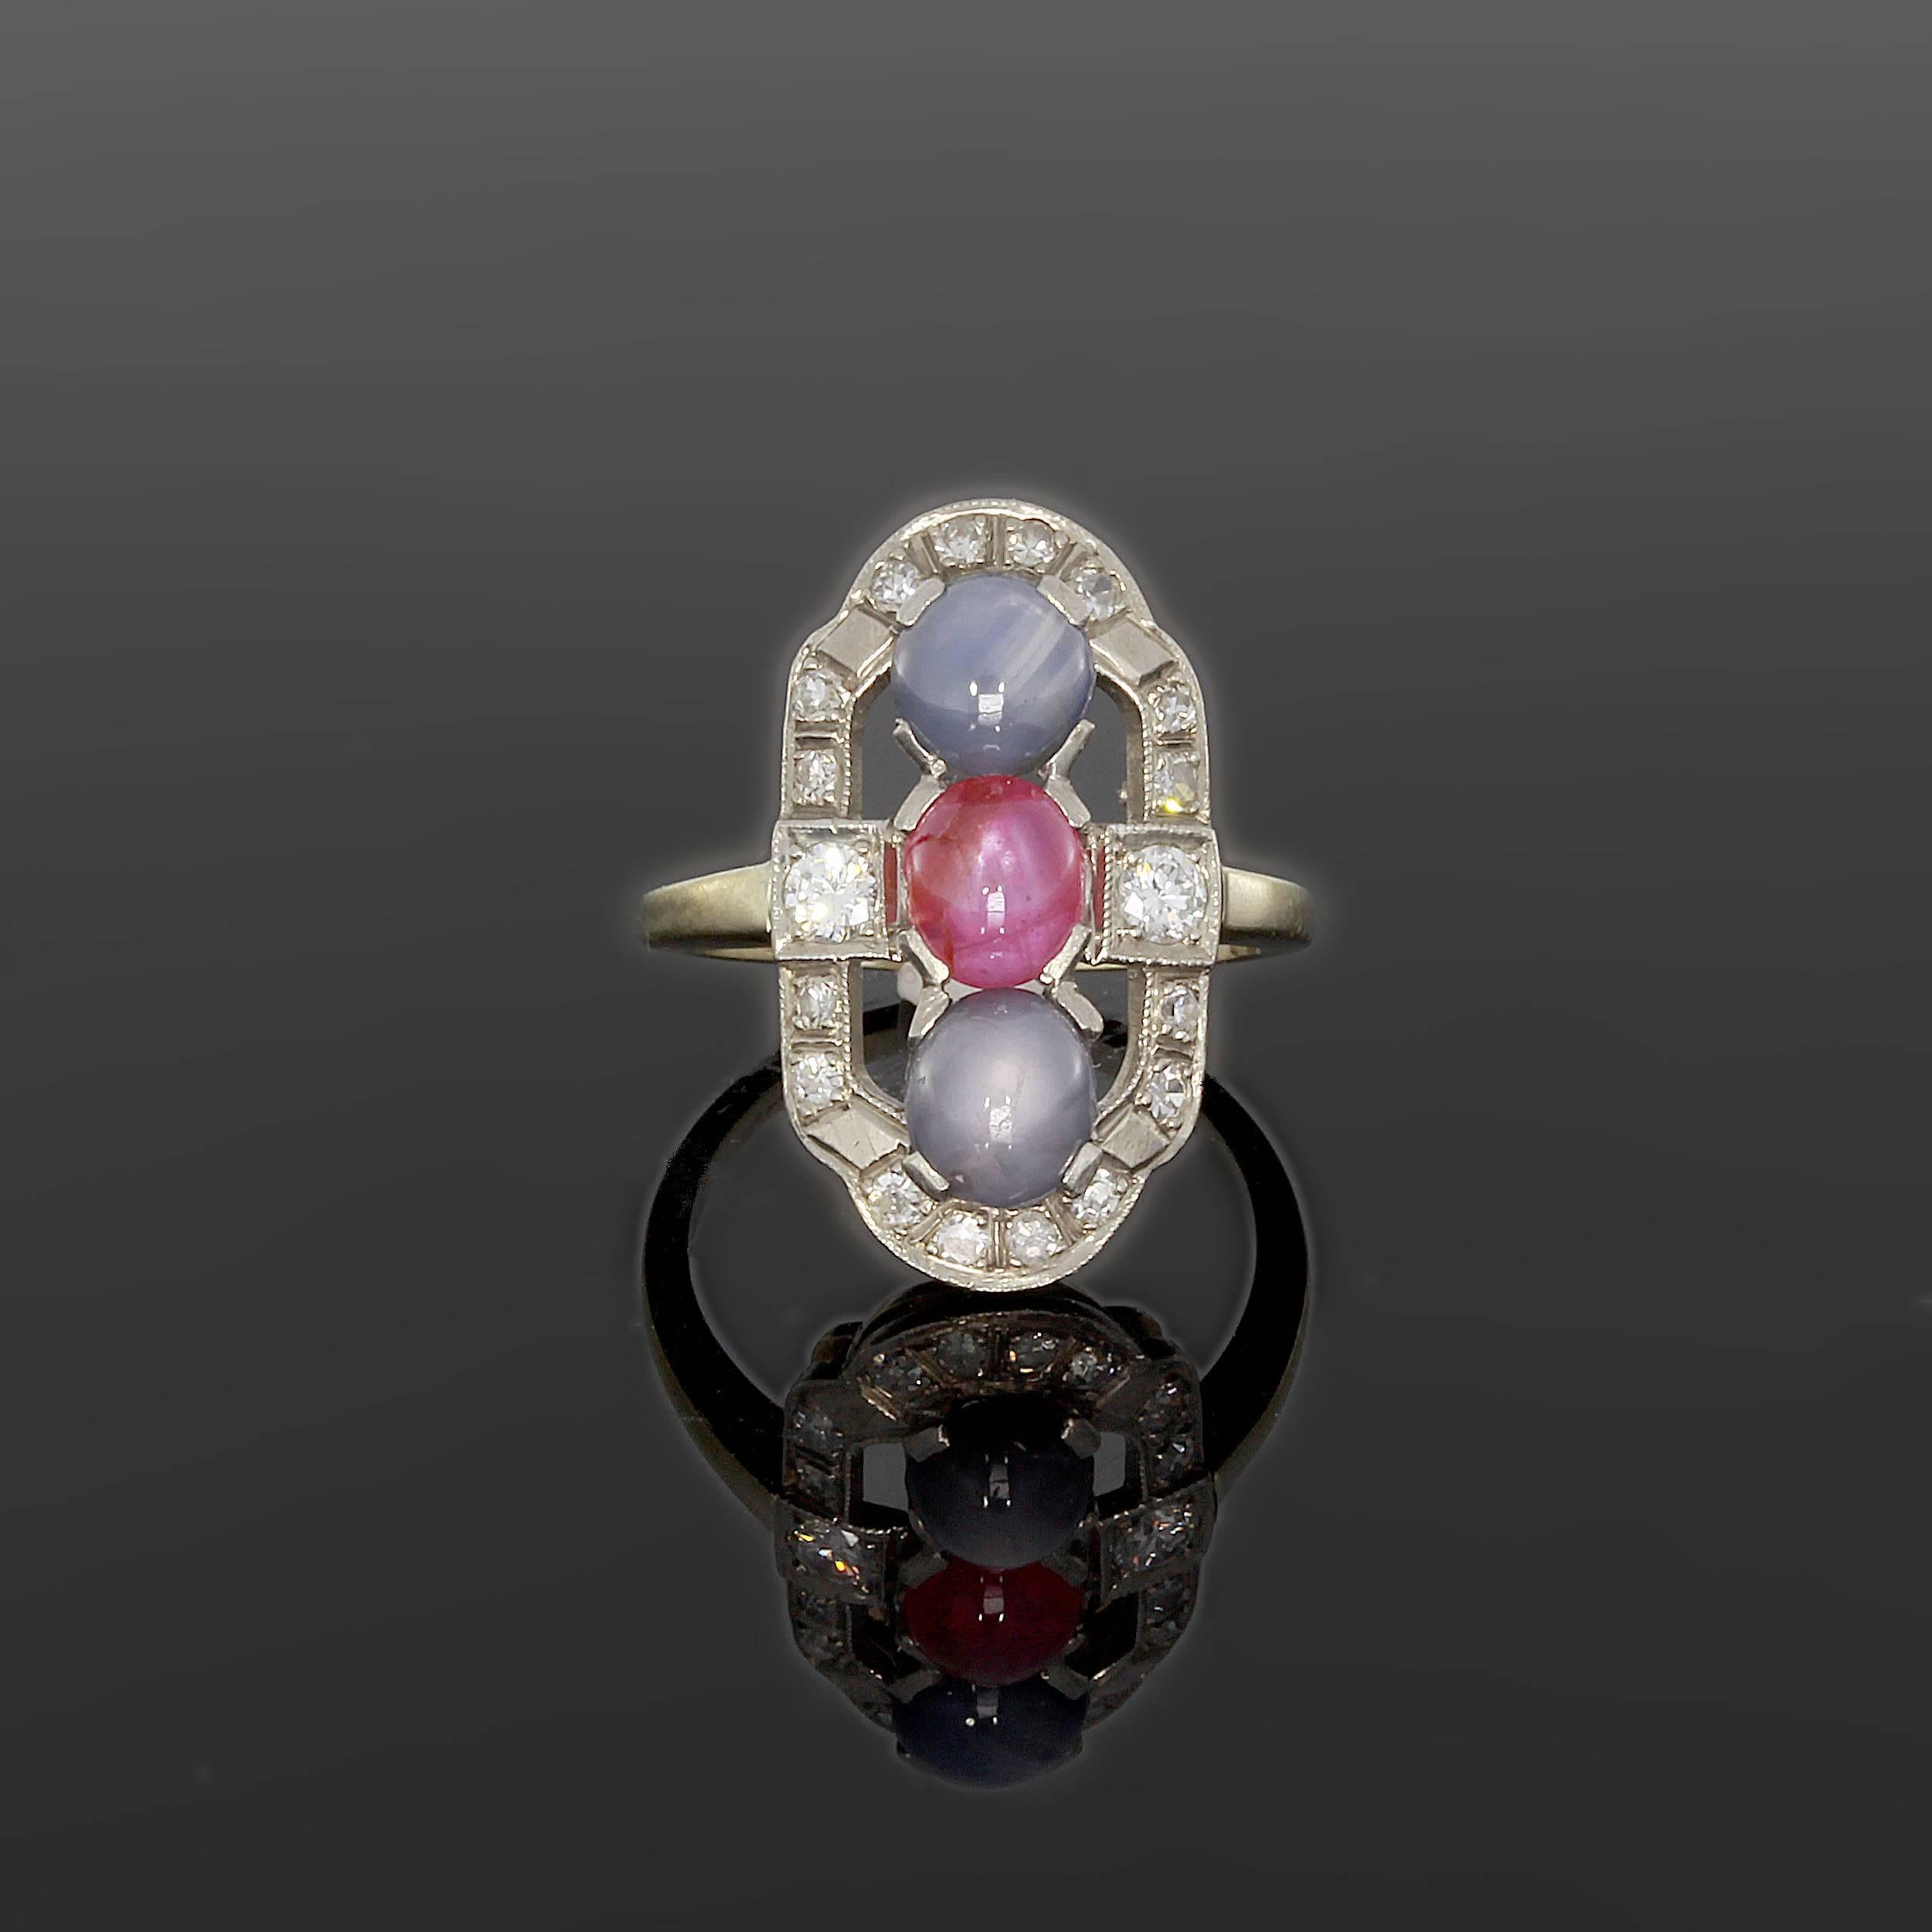 France, 1920s. 2 star cabochon-cut sapphire, 1 cabochon-cut star ruby and 18 brilliant-cut diamonds (Tot. 0.48ct.) Mounted in 14K white gold with millegrain setting. Hallmarked inside: 14K PALL Total weight: 4,66 g. Height: 0.98 in ( 2,5 cm ),